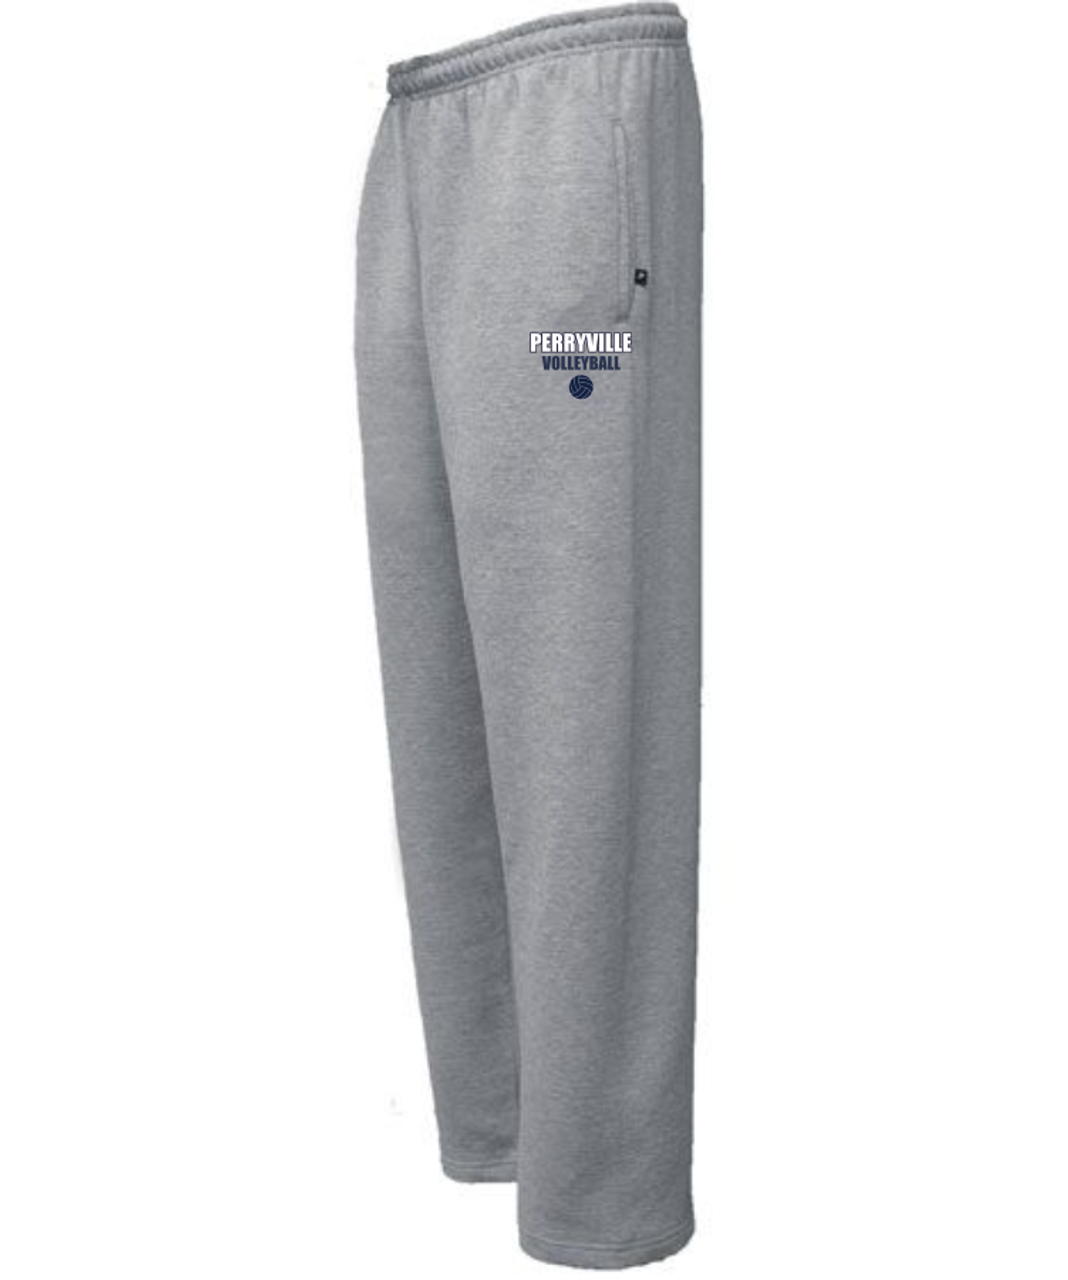 Perryville Volleyball Sweatpants, Gray